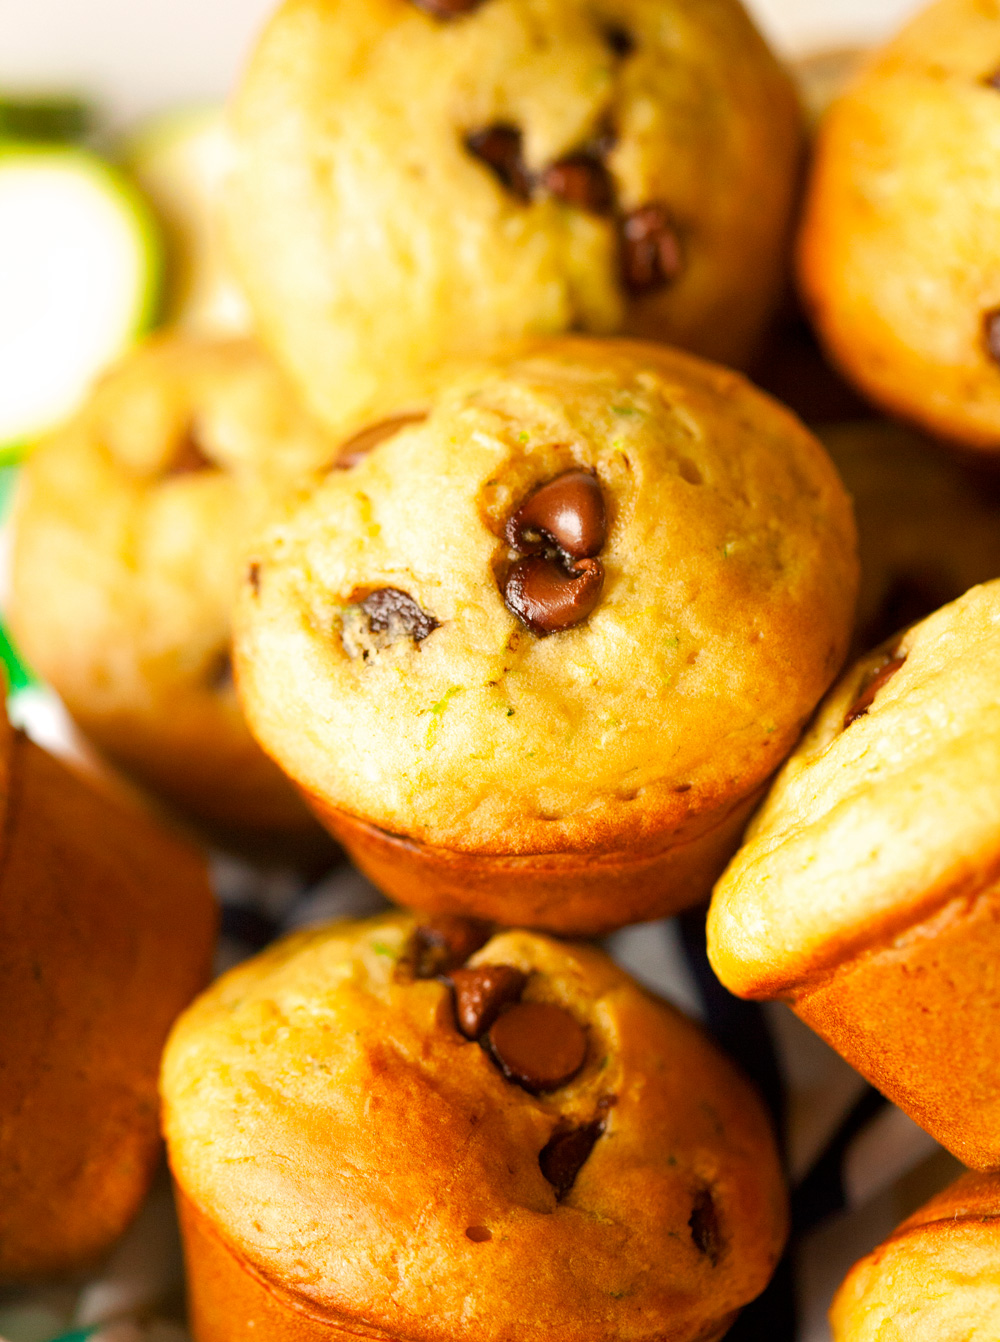 Zucchini Chocolate Chip Muffins… these are simple to make, taste delicious and a great way to use up some zucchini!